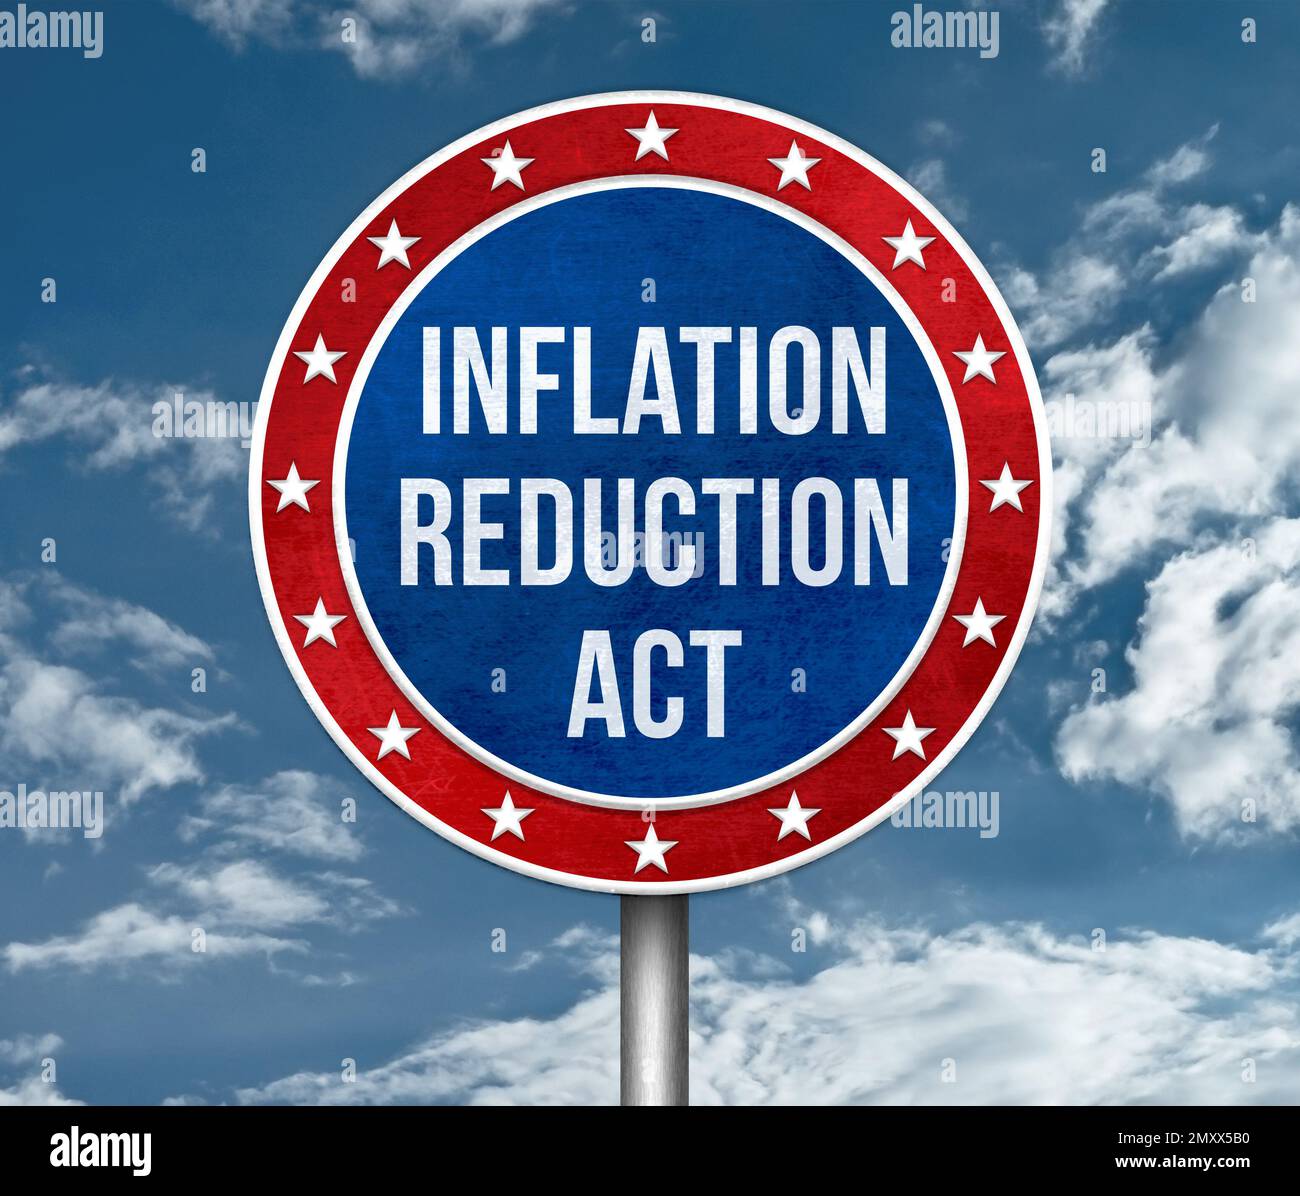 Inflation Reduction Act for reducing the deficit - road sign message Stock Photo